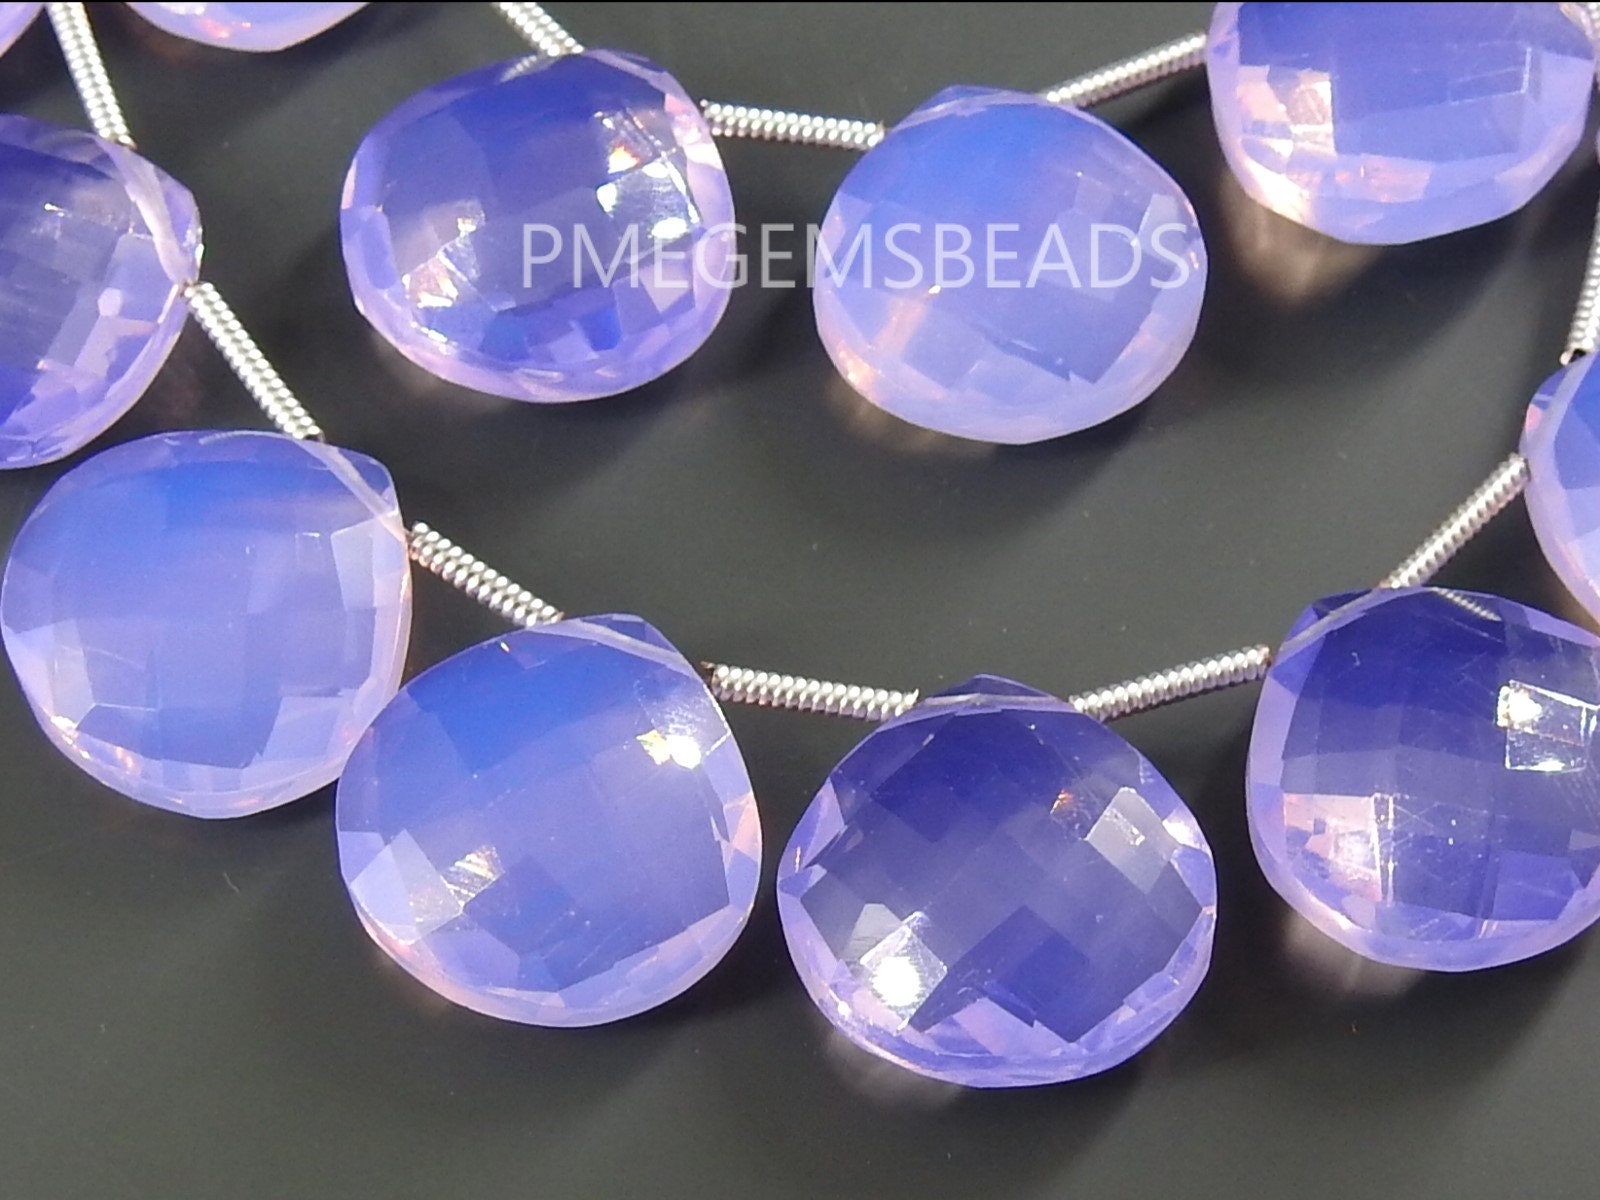 Lavender Blue Quartz Hearts,Teardrop,Drop,Micro Faceted,Loose Stone,Earrings Pair,For Making Jewelry,Hydro,Glass 14X14MM Approx (pme) | Save 33% - Rajasthan Living 13